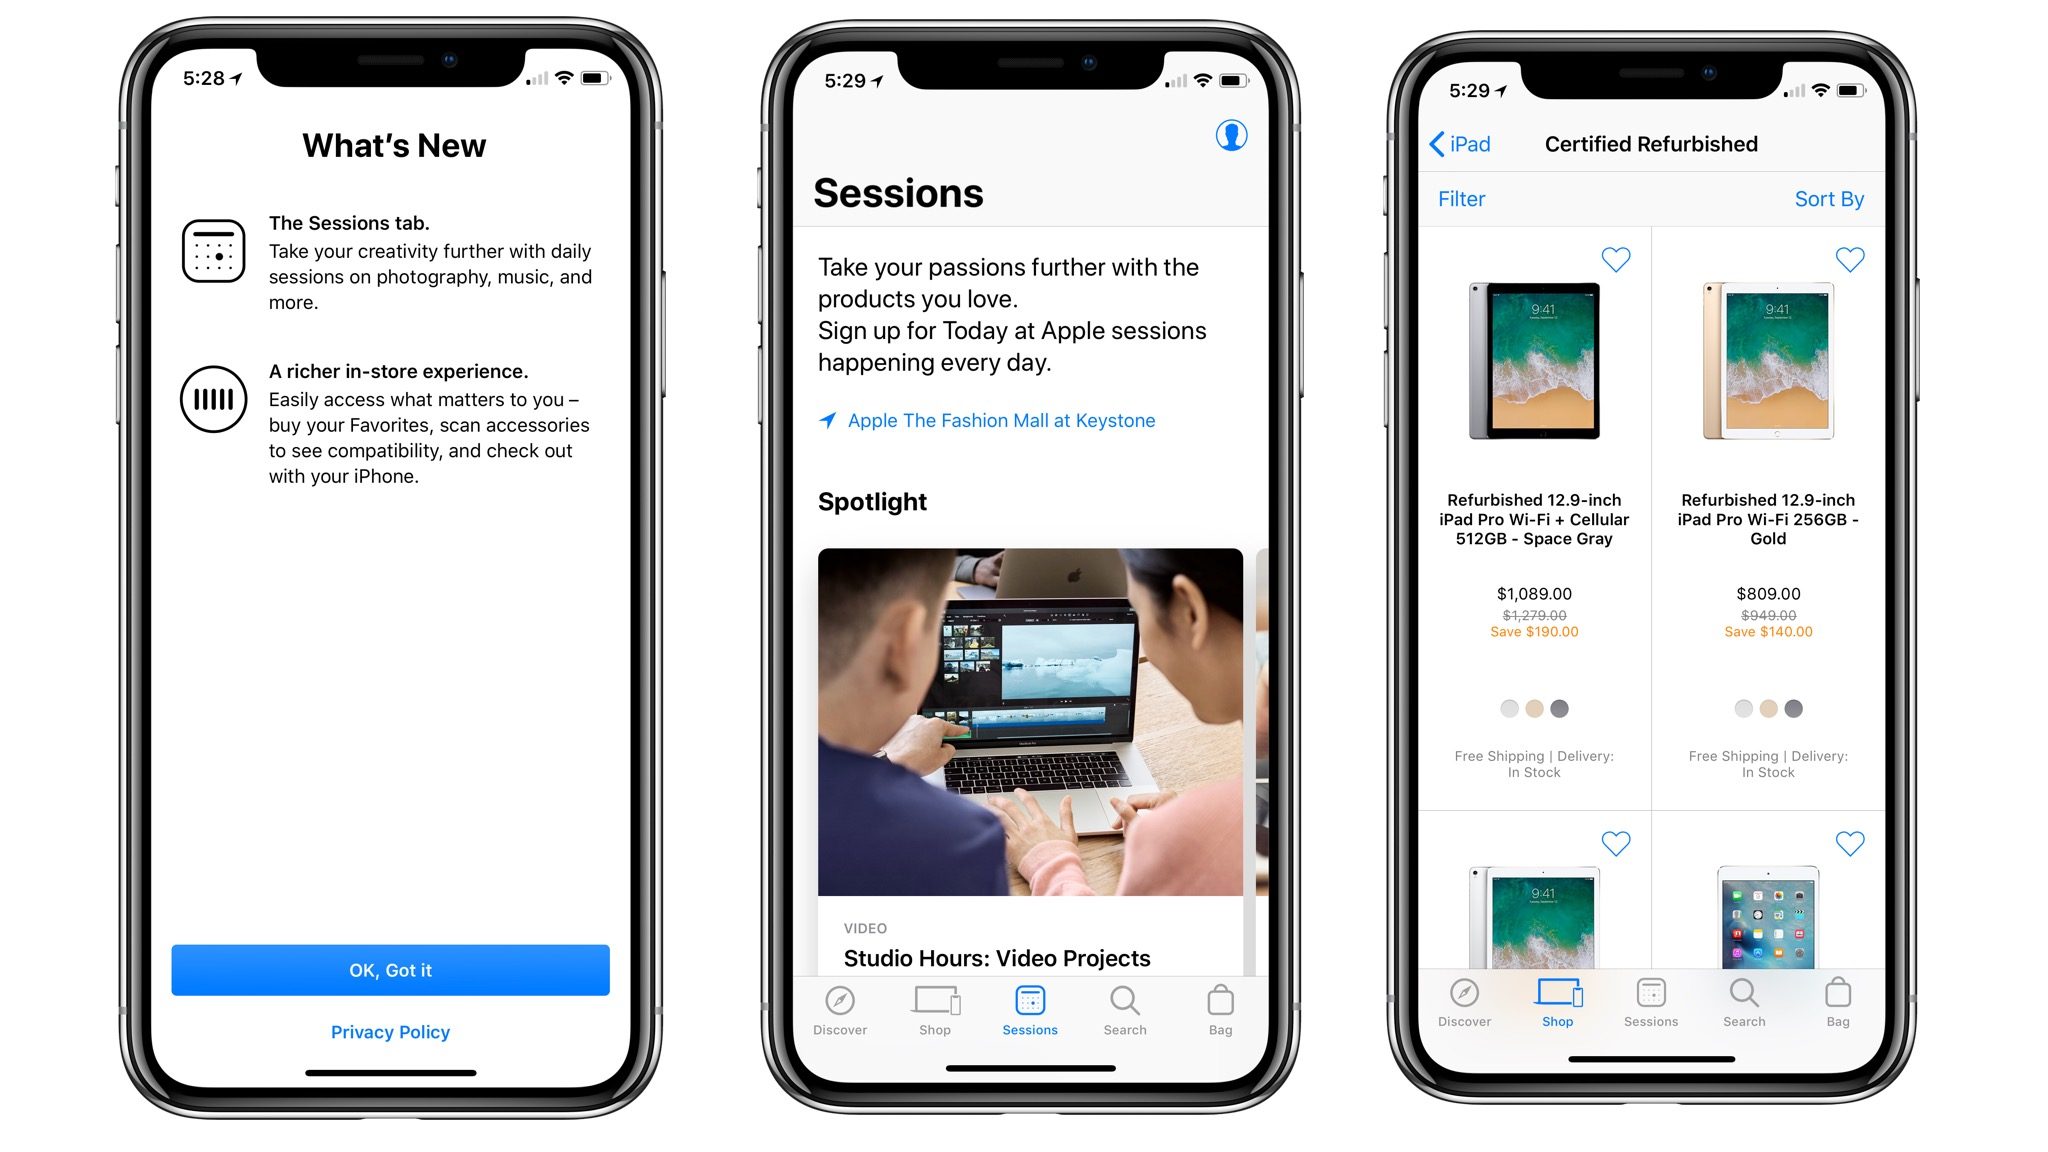 Apple Store App for iOS Adds ‘Sessions’ Feature to Improved User's Experience